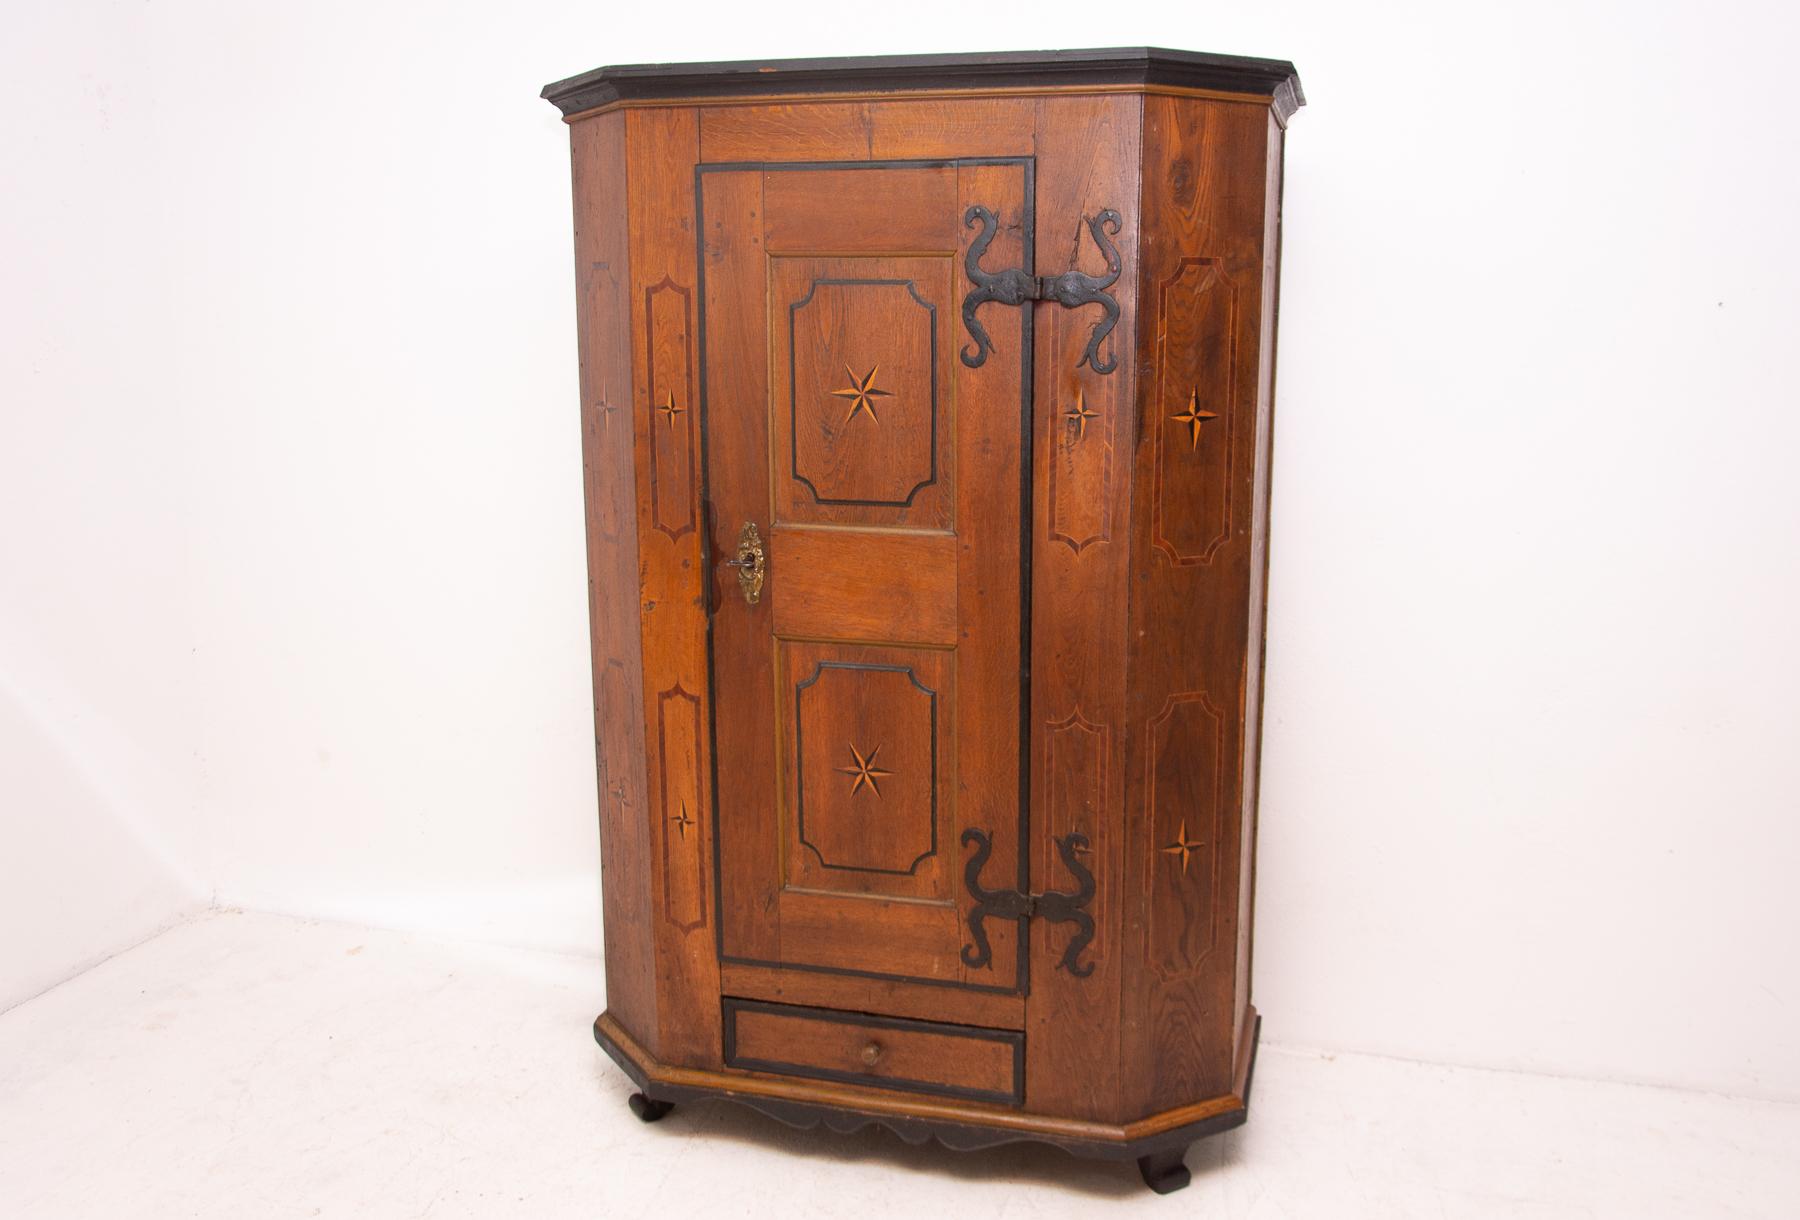 Original Baroque wardrobe from the mid-18th century. It was made in the former Austro-Hungarian Empire. All in original and very well preserved condition. The wardrobe features an original fittings, original Baroque lock . It is made of oak solid